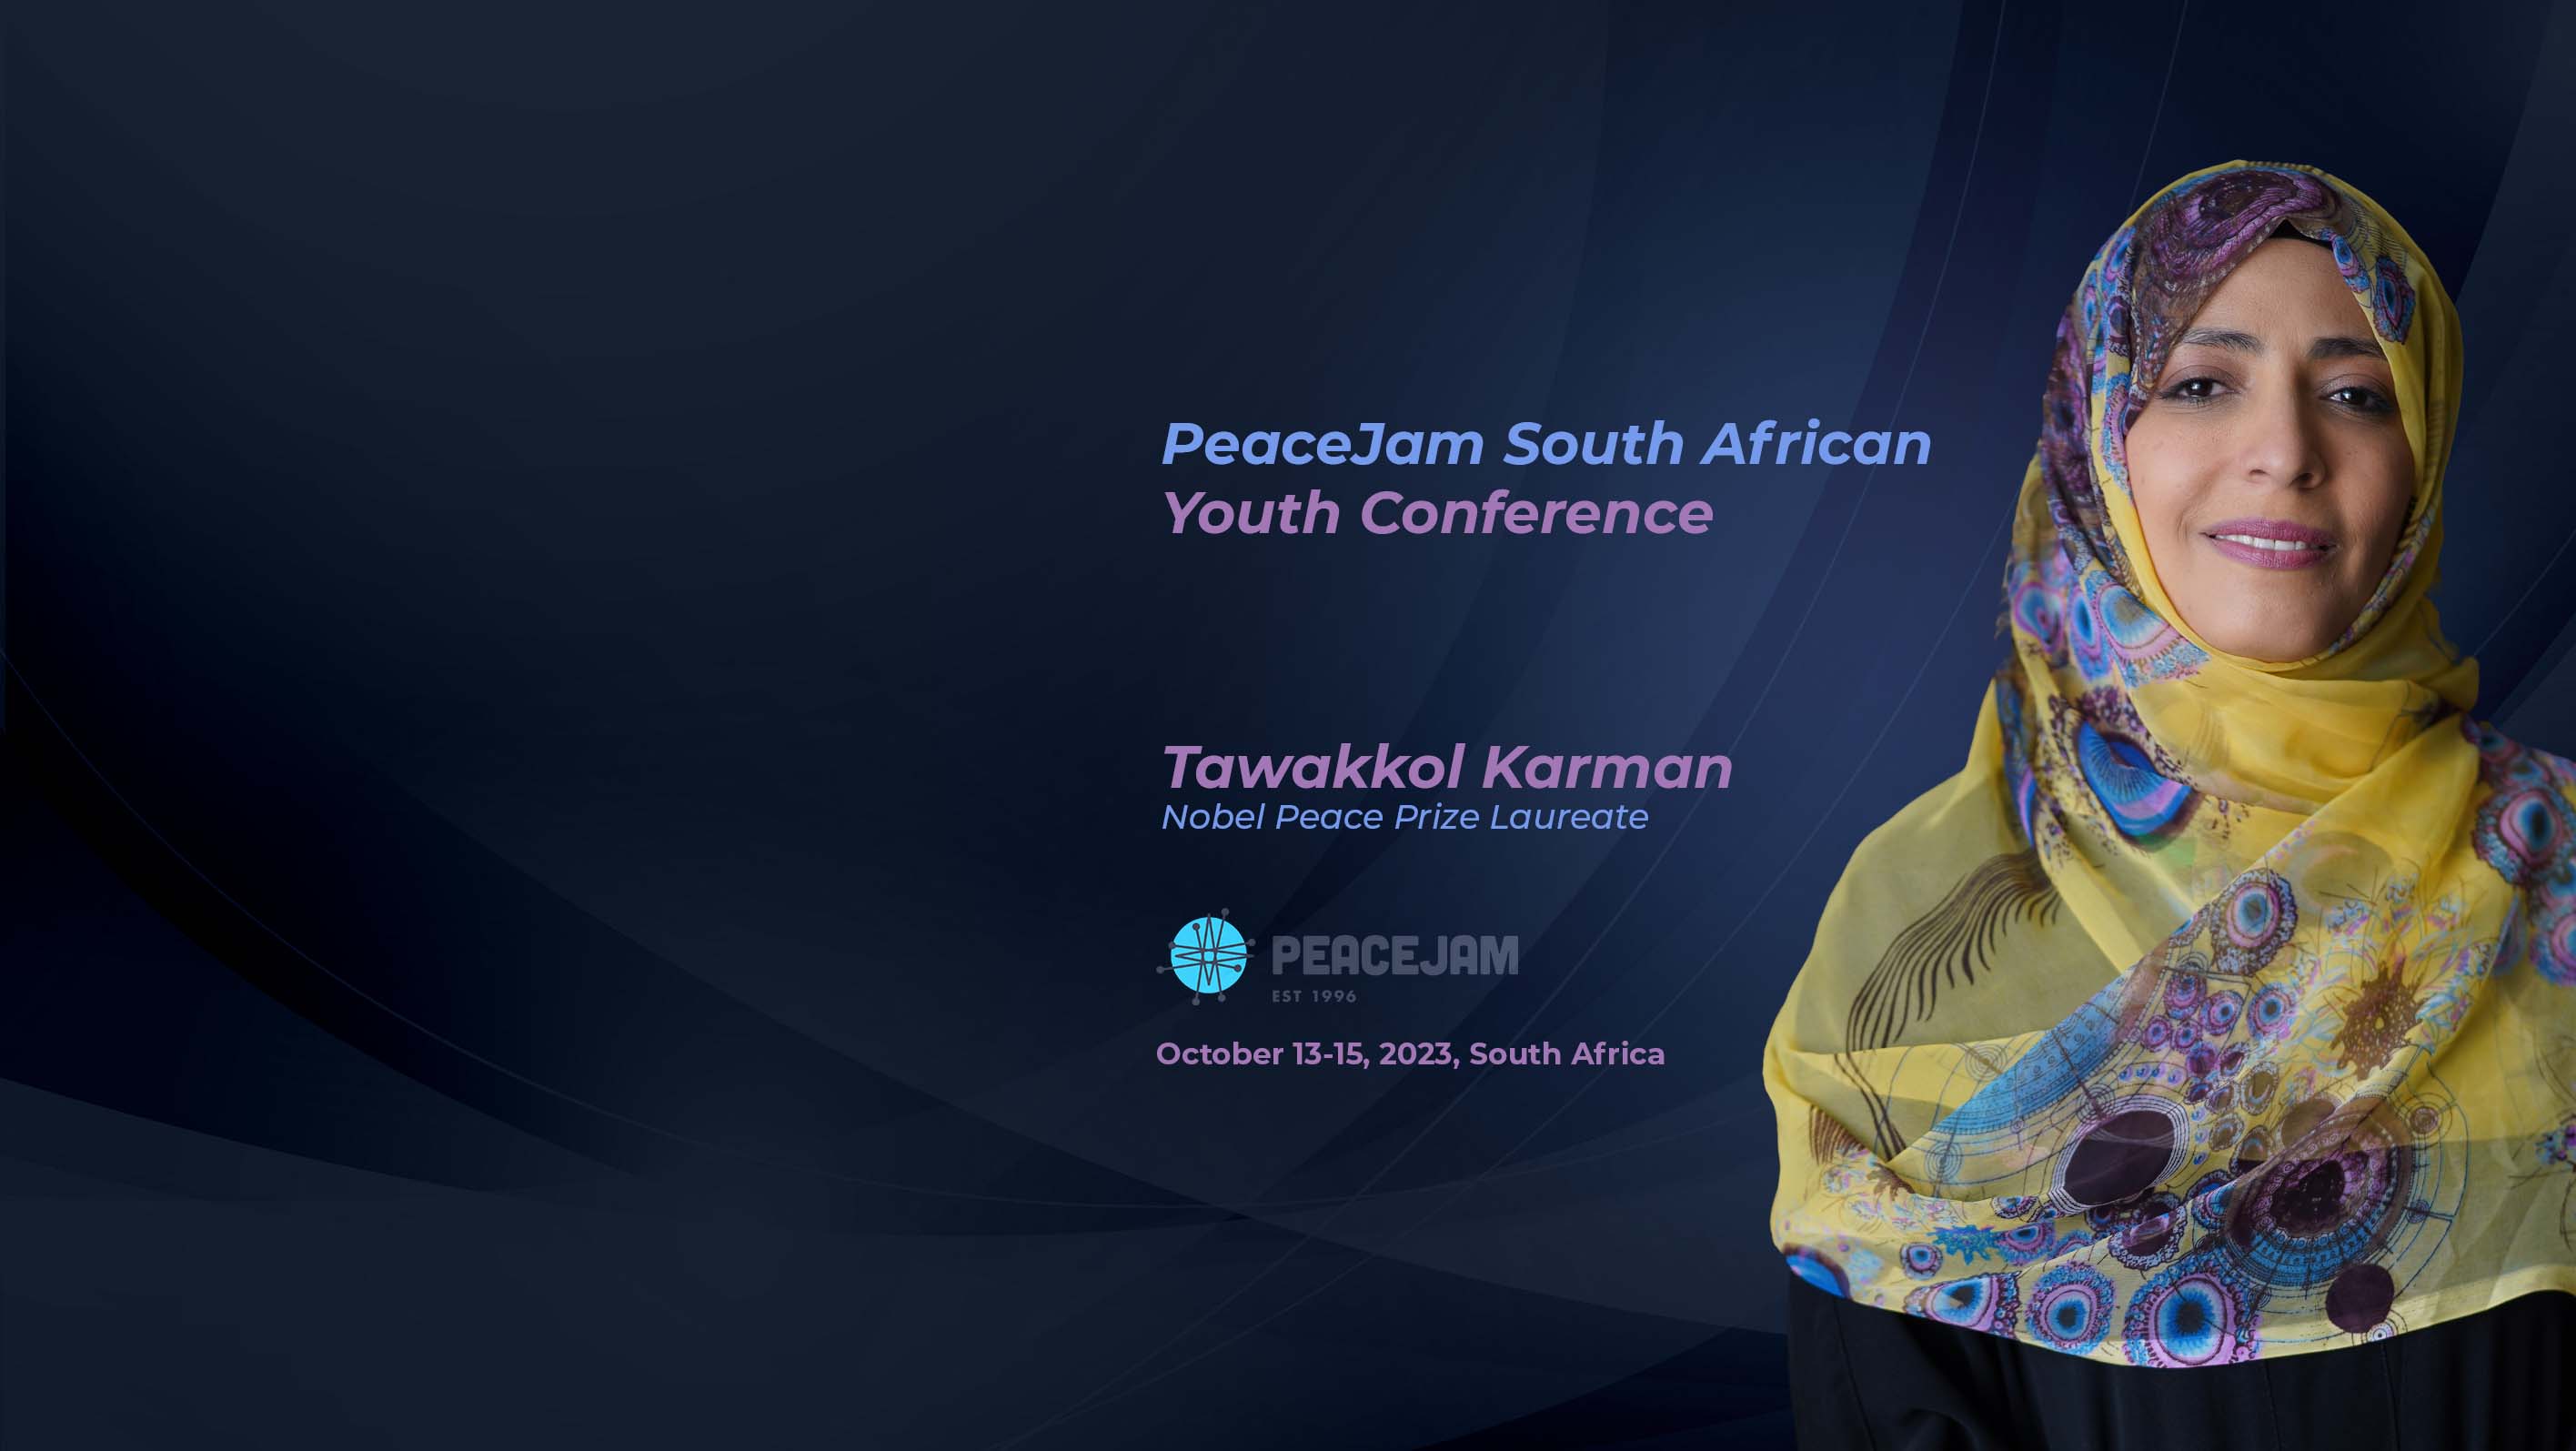 Tawakkol Karman to address at PeaceJam South Africa 2023 Youth Conference